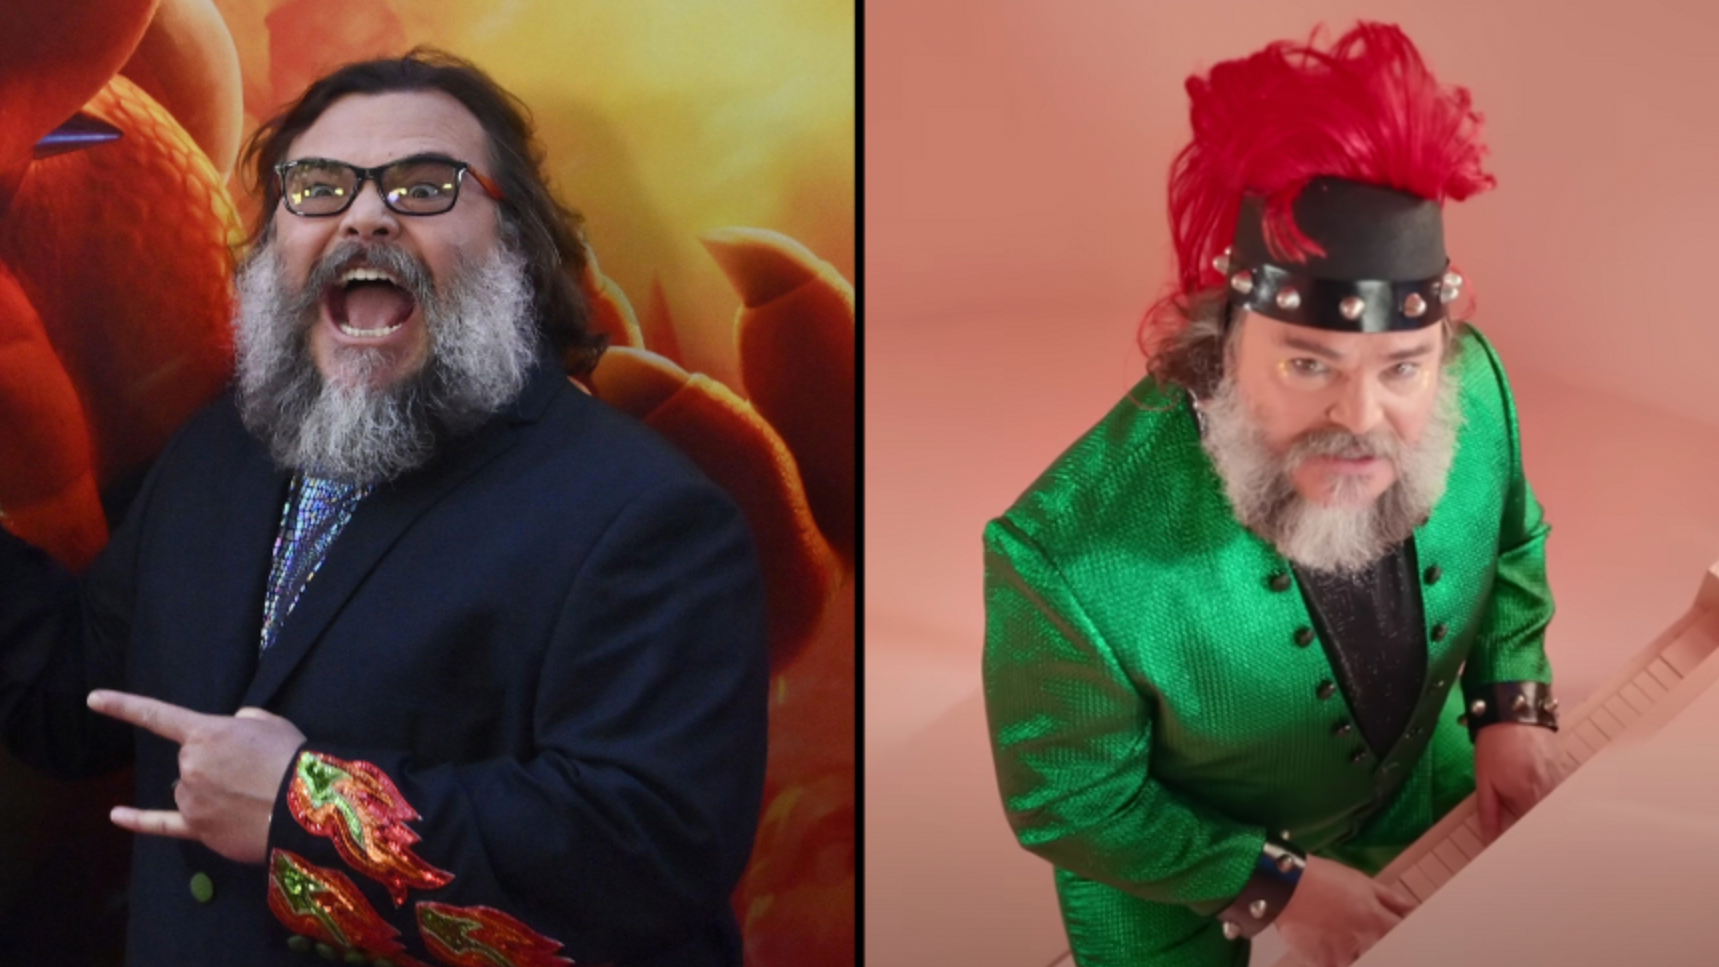 Jack Black - Peaches (Directed by Cole Bennett) The Super Mario Bros. Movie  